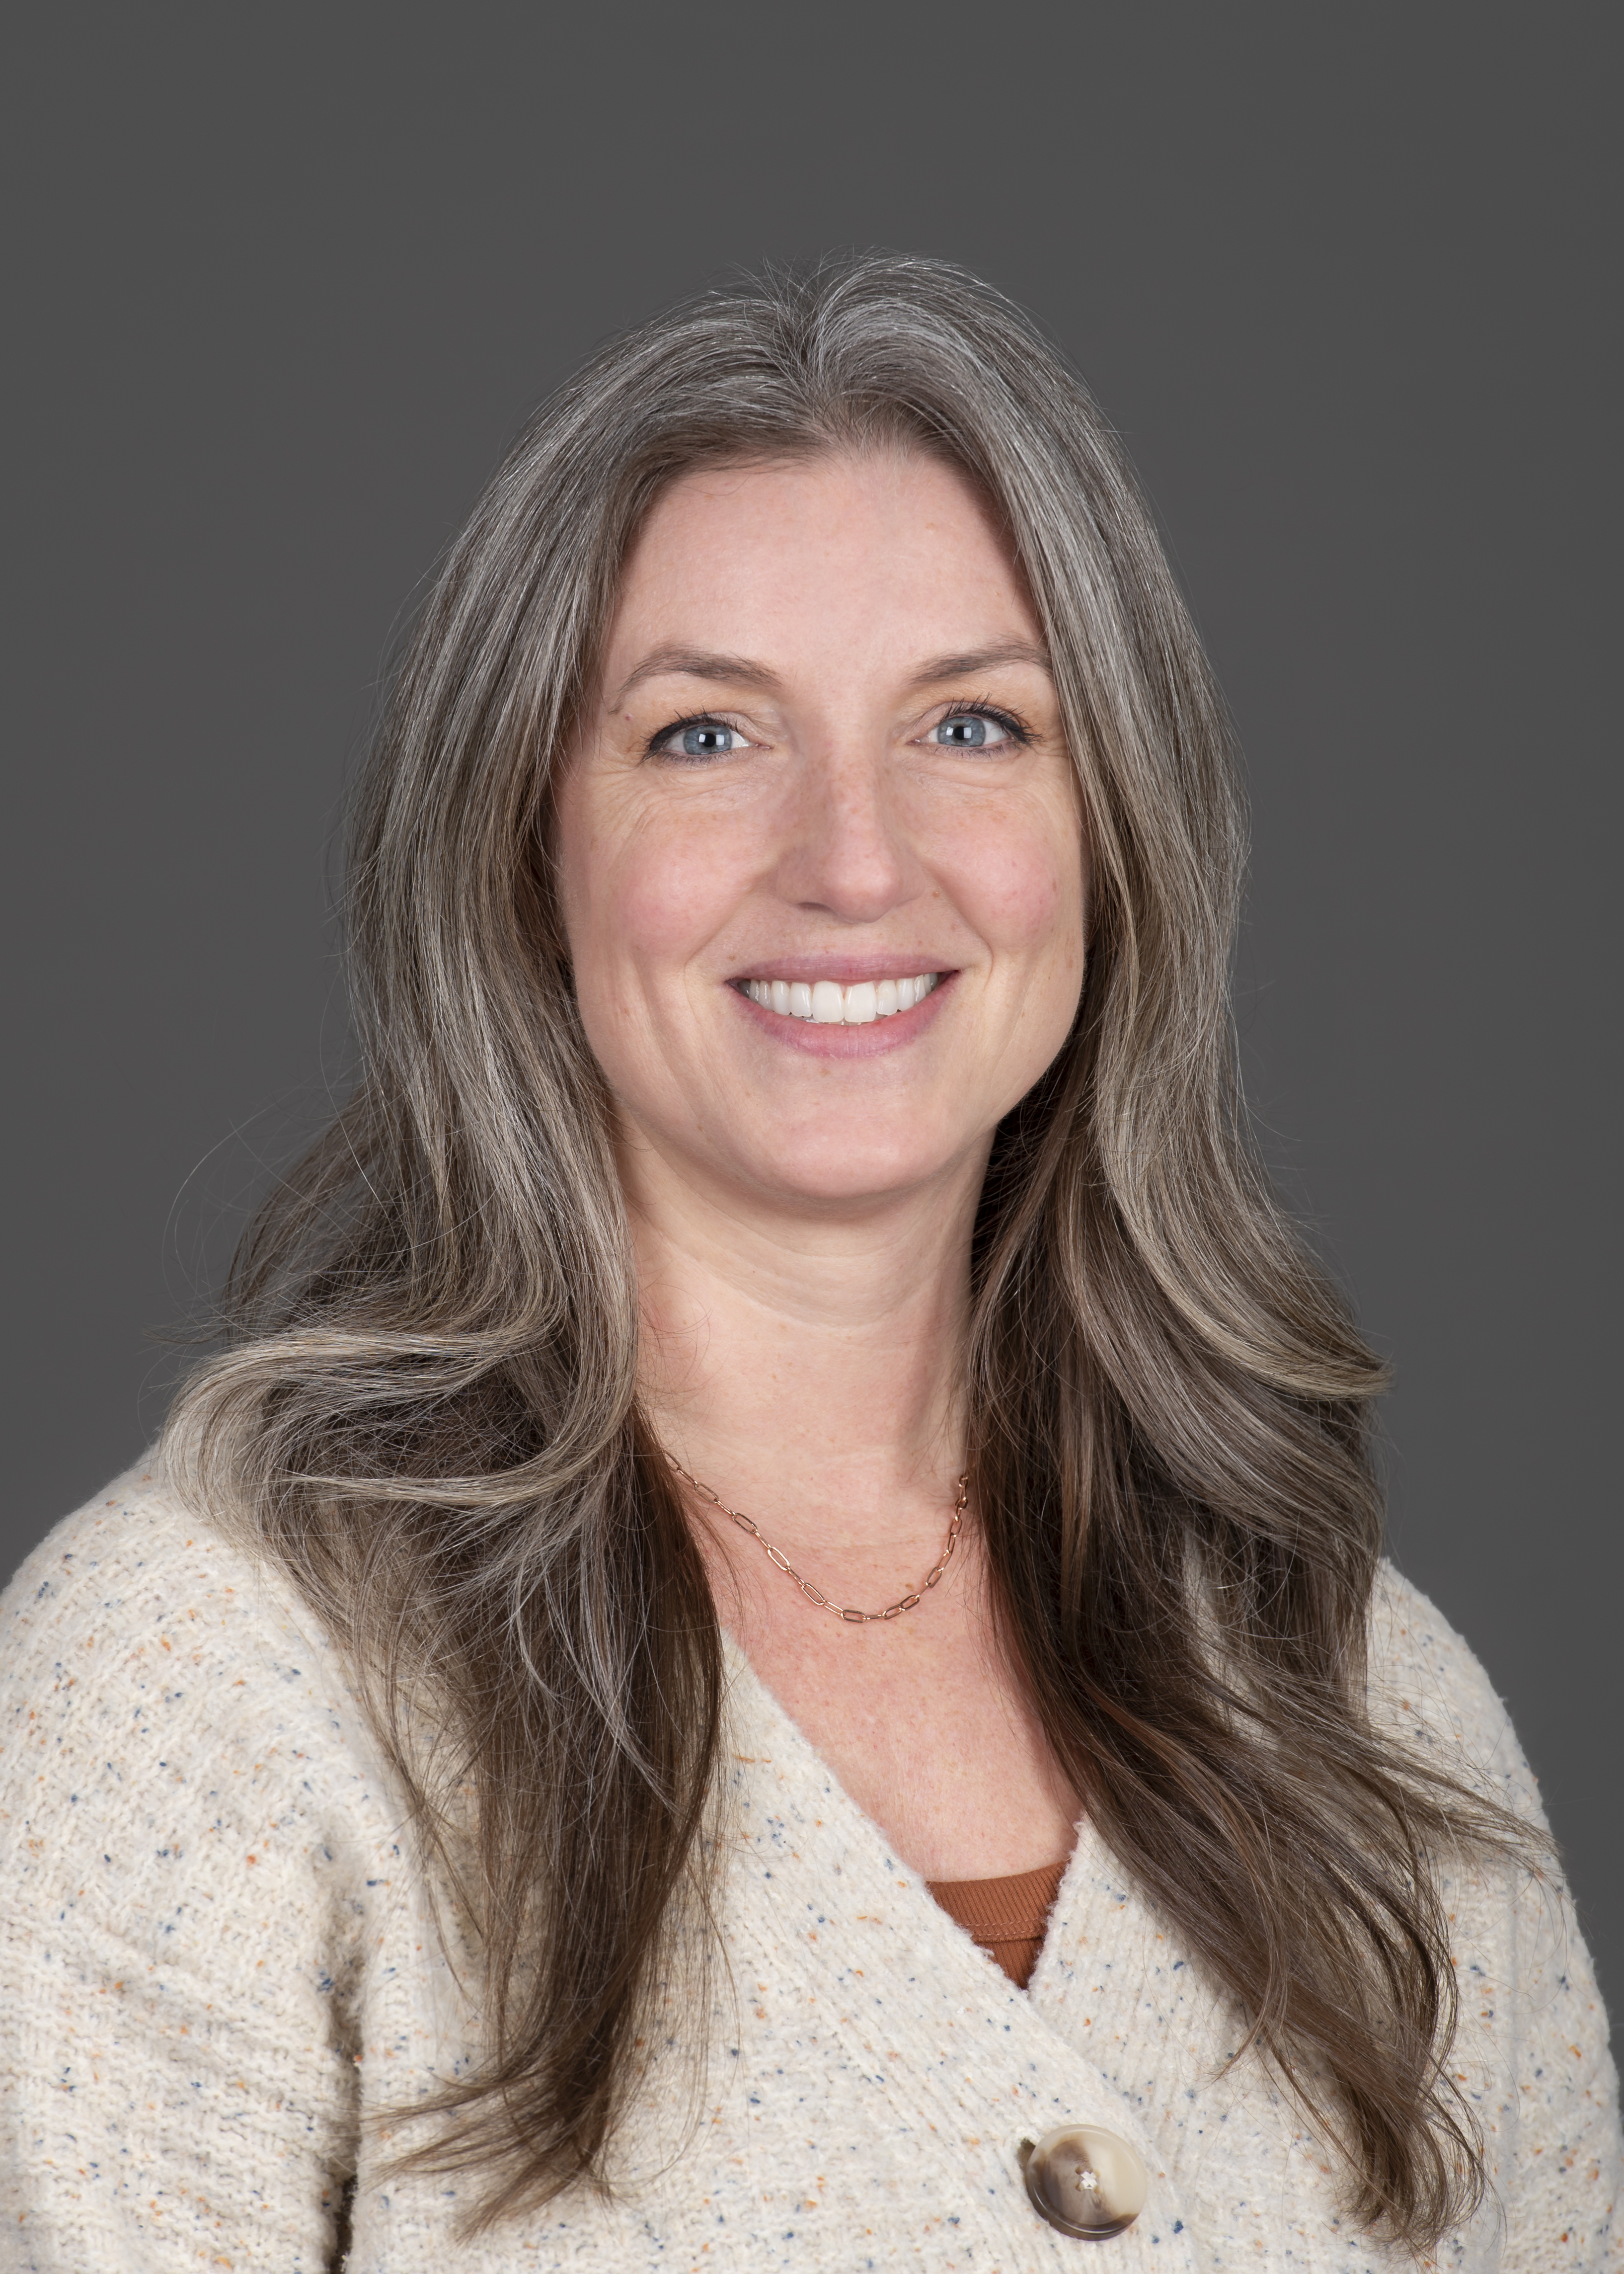 Headshot photo of Carly Lingenfelter, Ph.D.